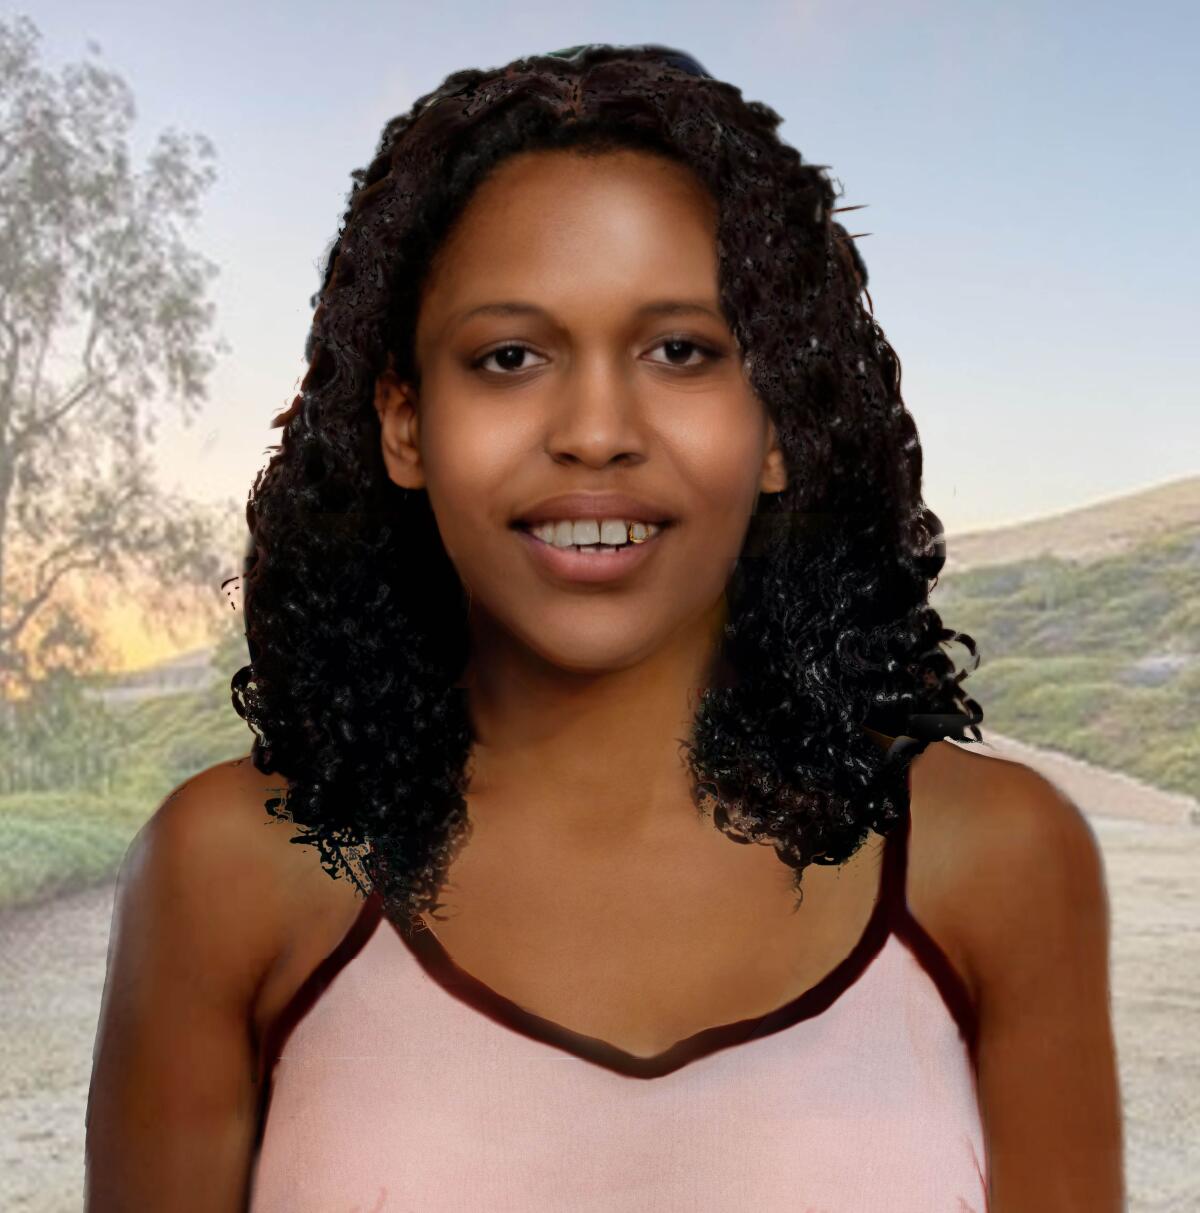 The Orange County Sheriff’s Department released a rendering of a Jane Doe.